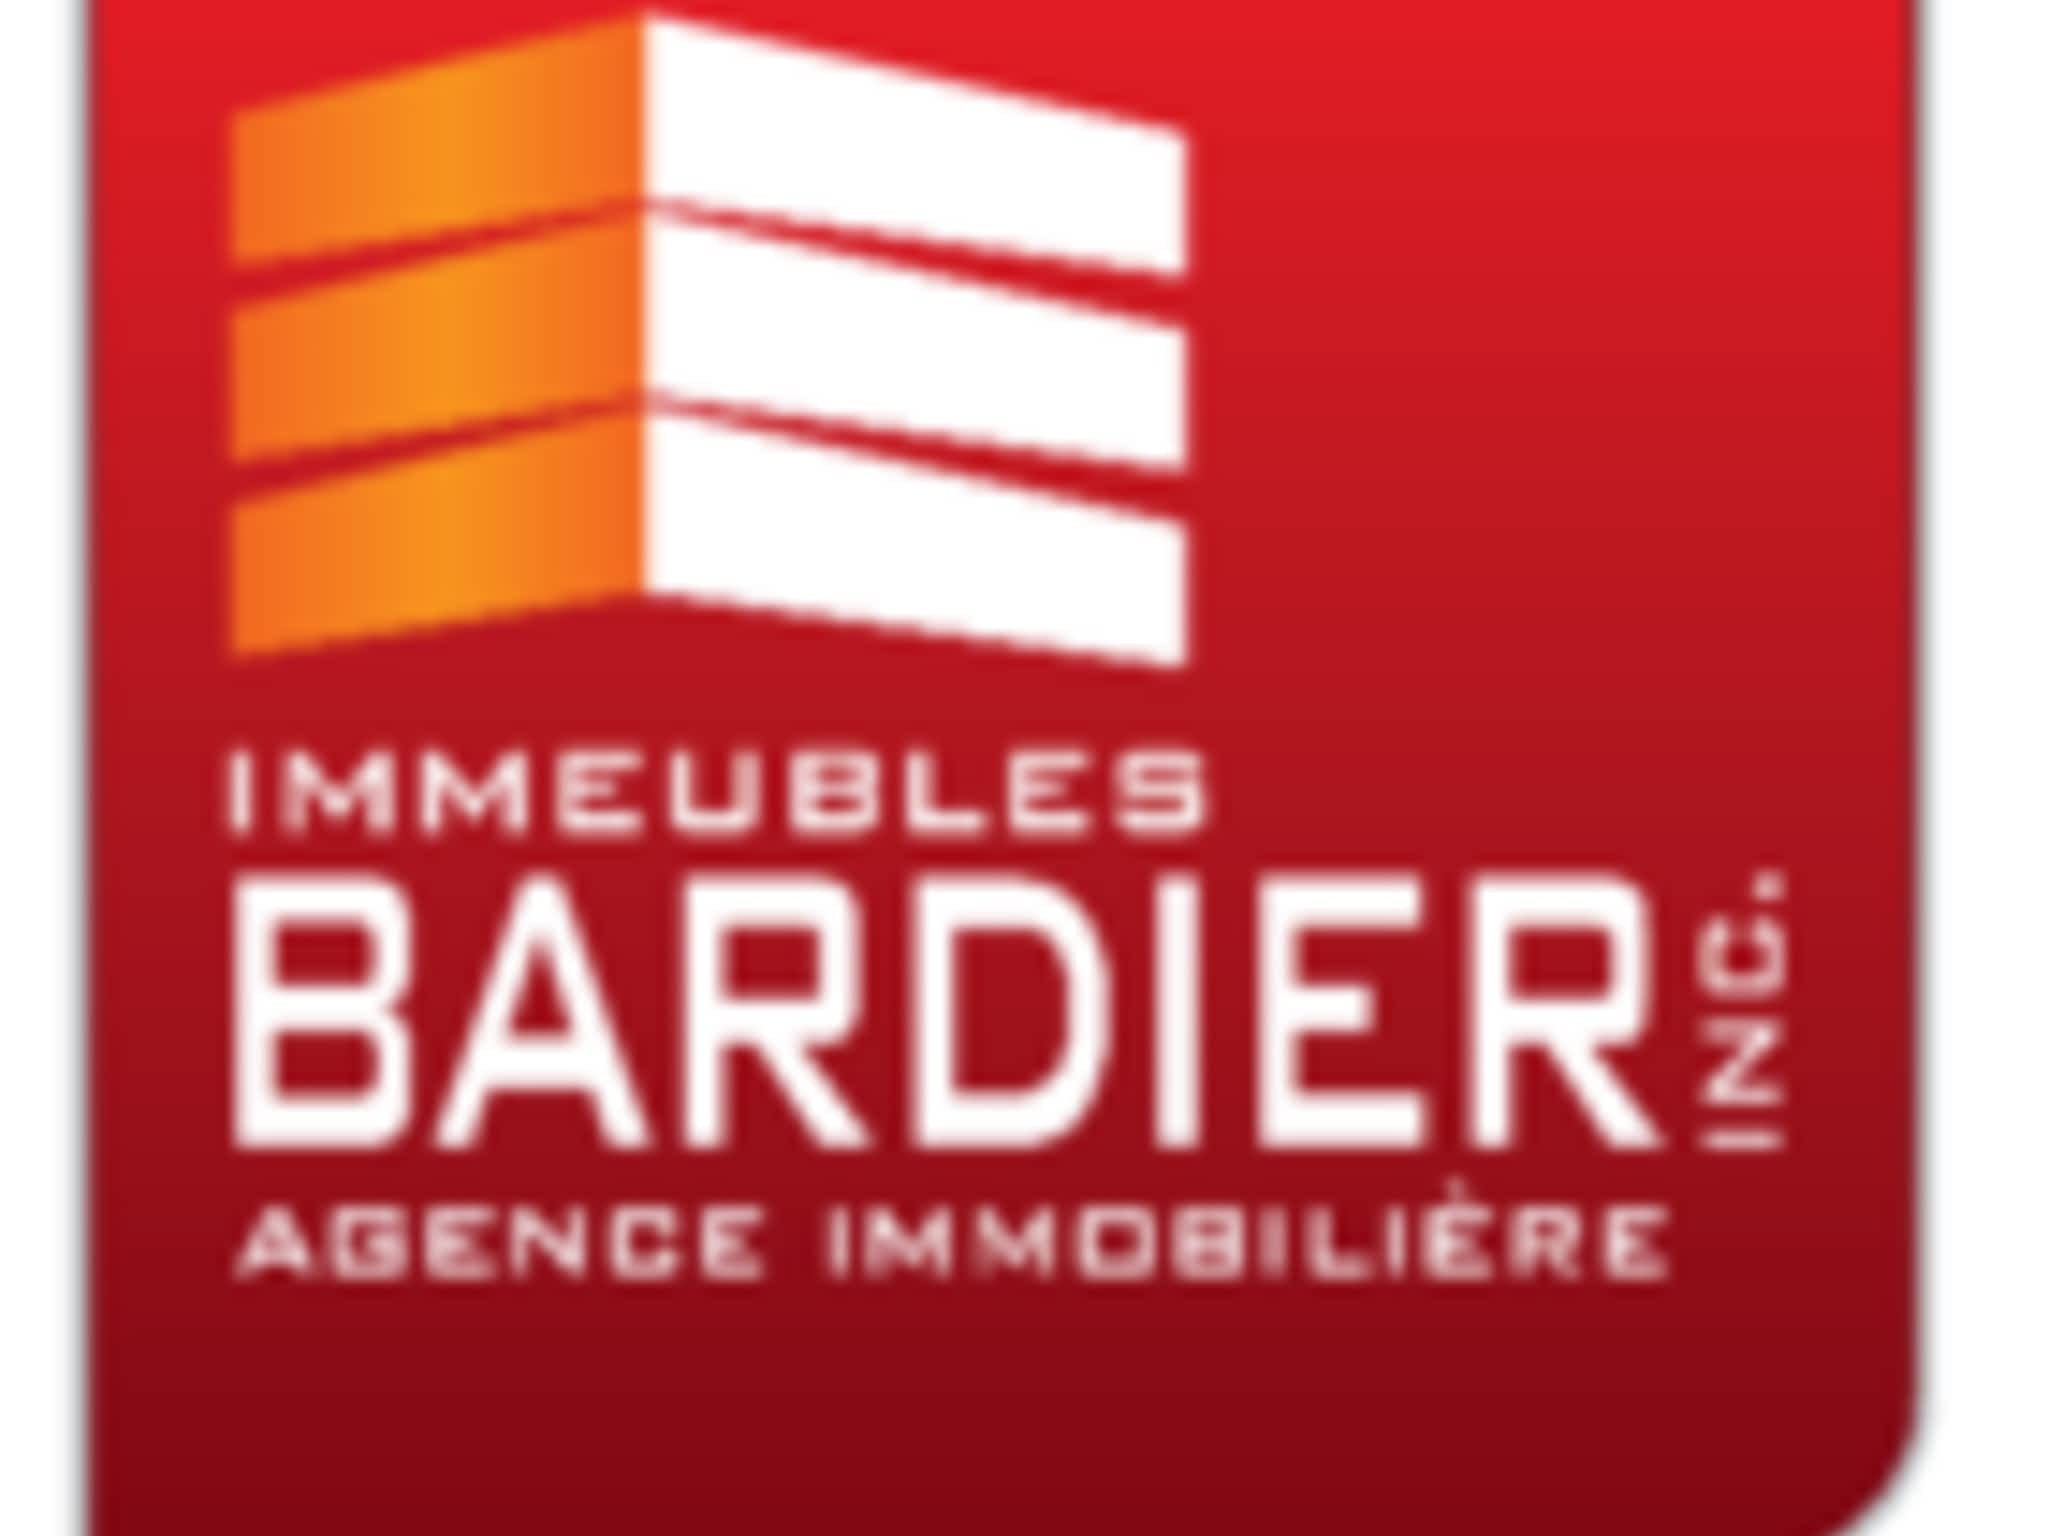 photo Hugues Bardier Courtier Immobilier, Immeubles Bardier Inc